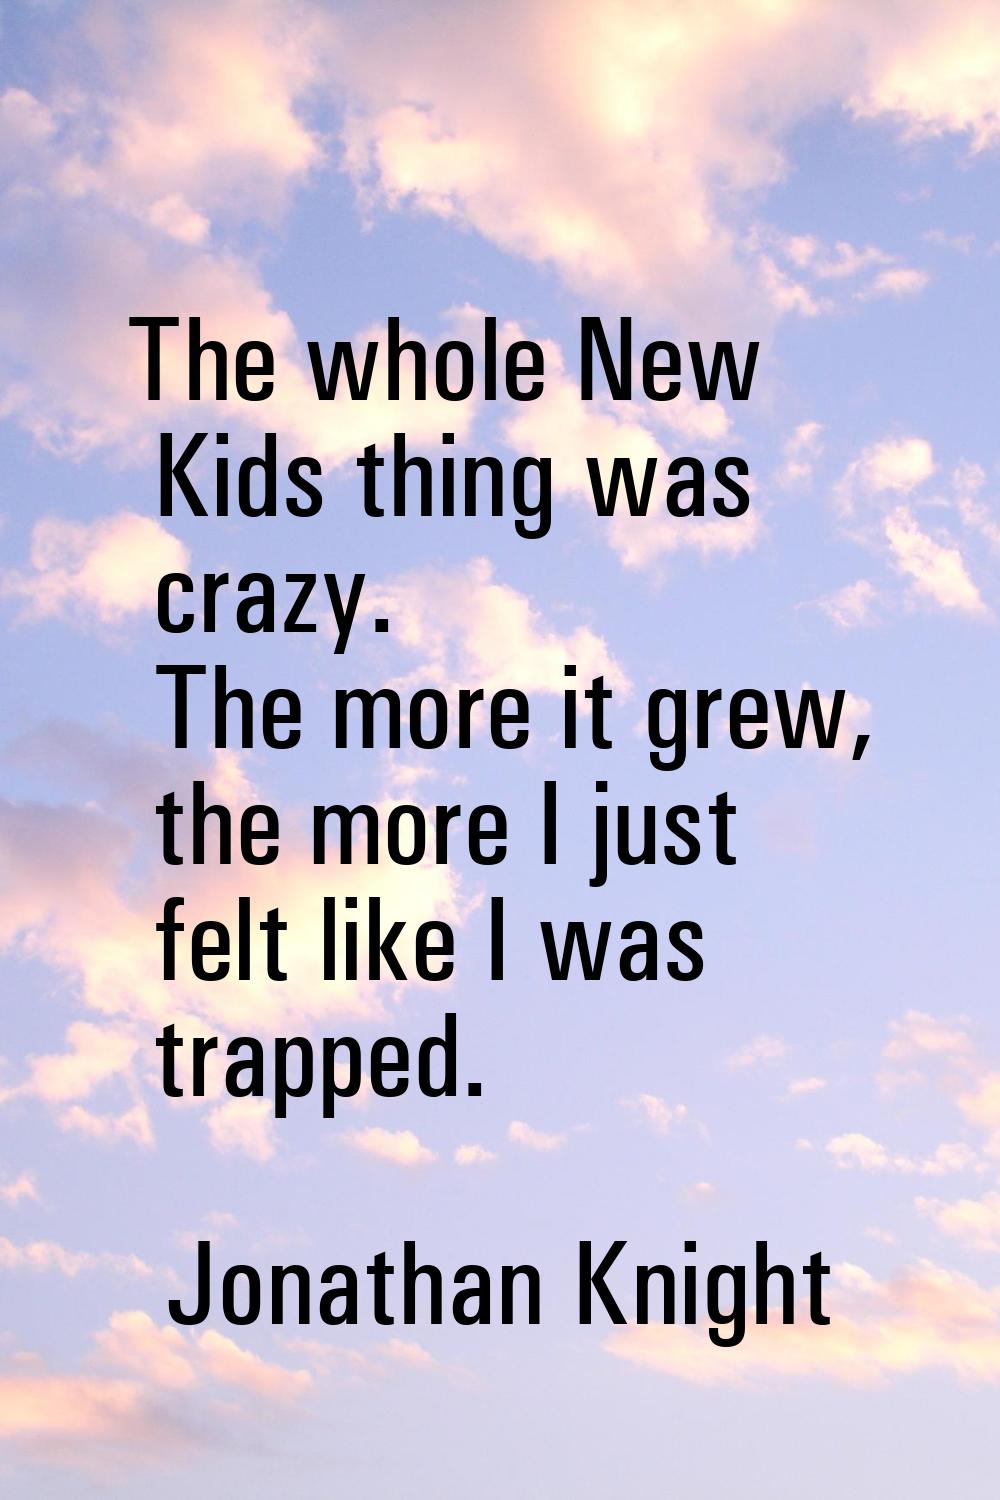 The whole New Kids thing was crazy. The more it grew, the more I just felt like I was trapped.